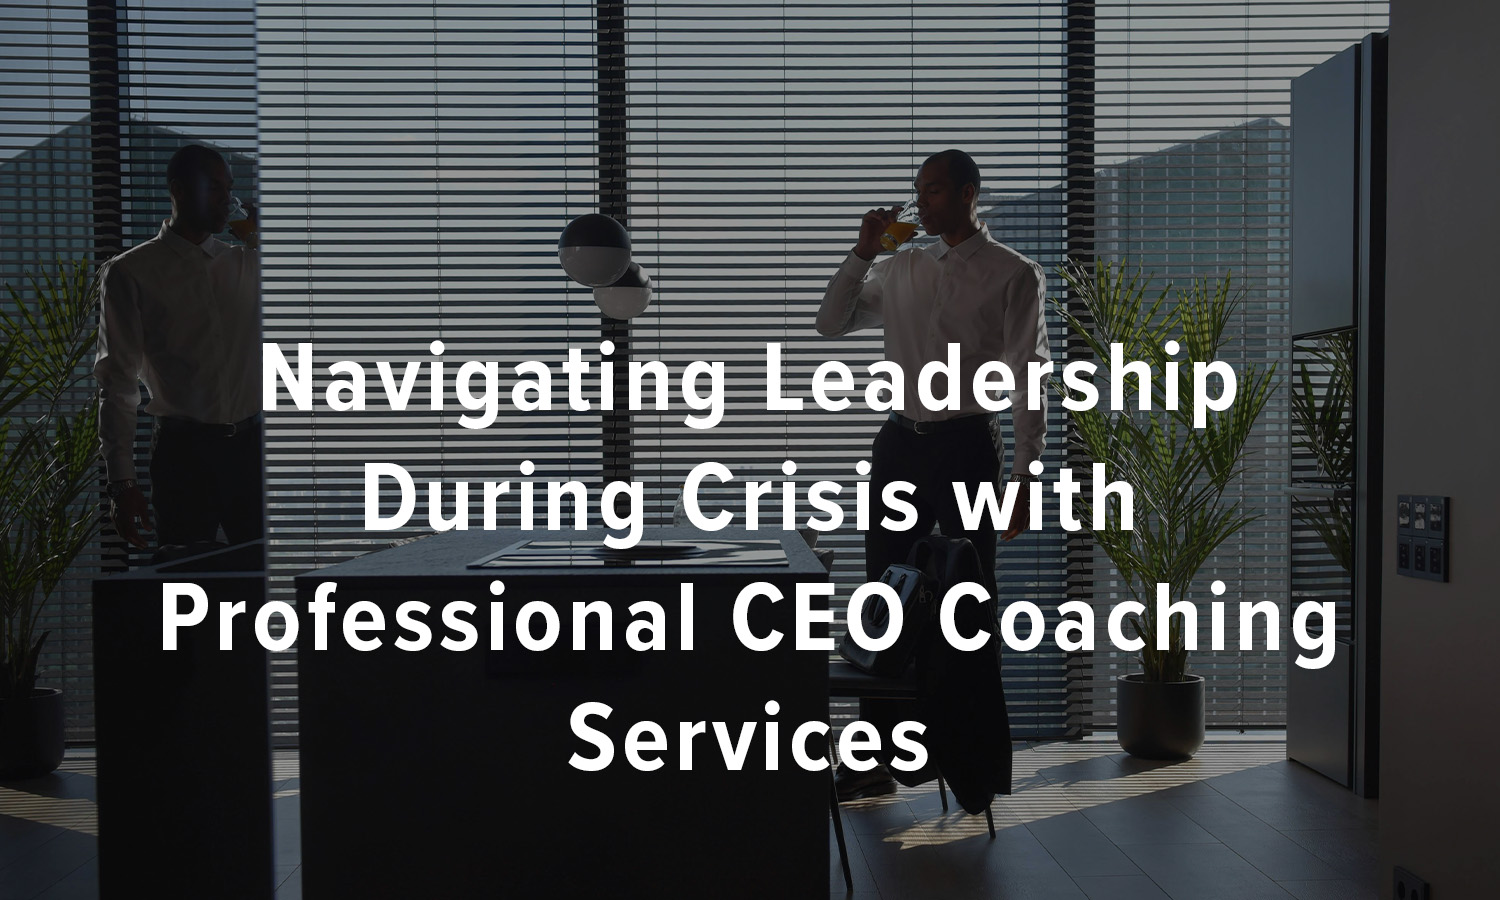 Navigating Leadership During Crisis with Professional CEO Coaching Services